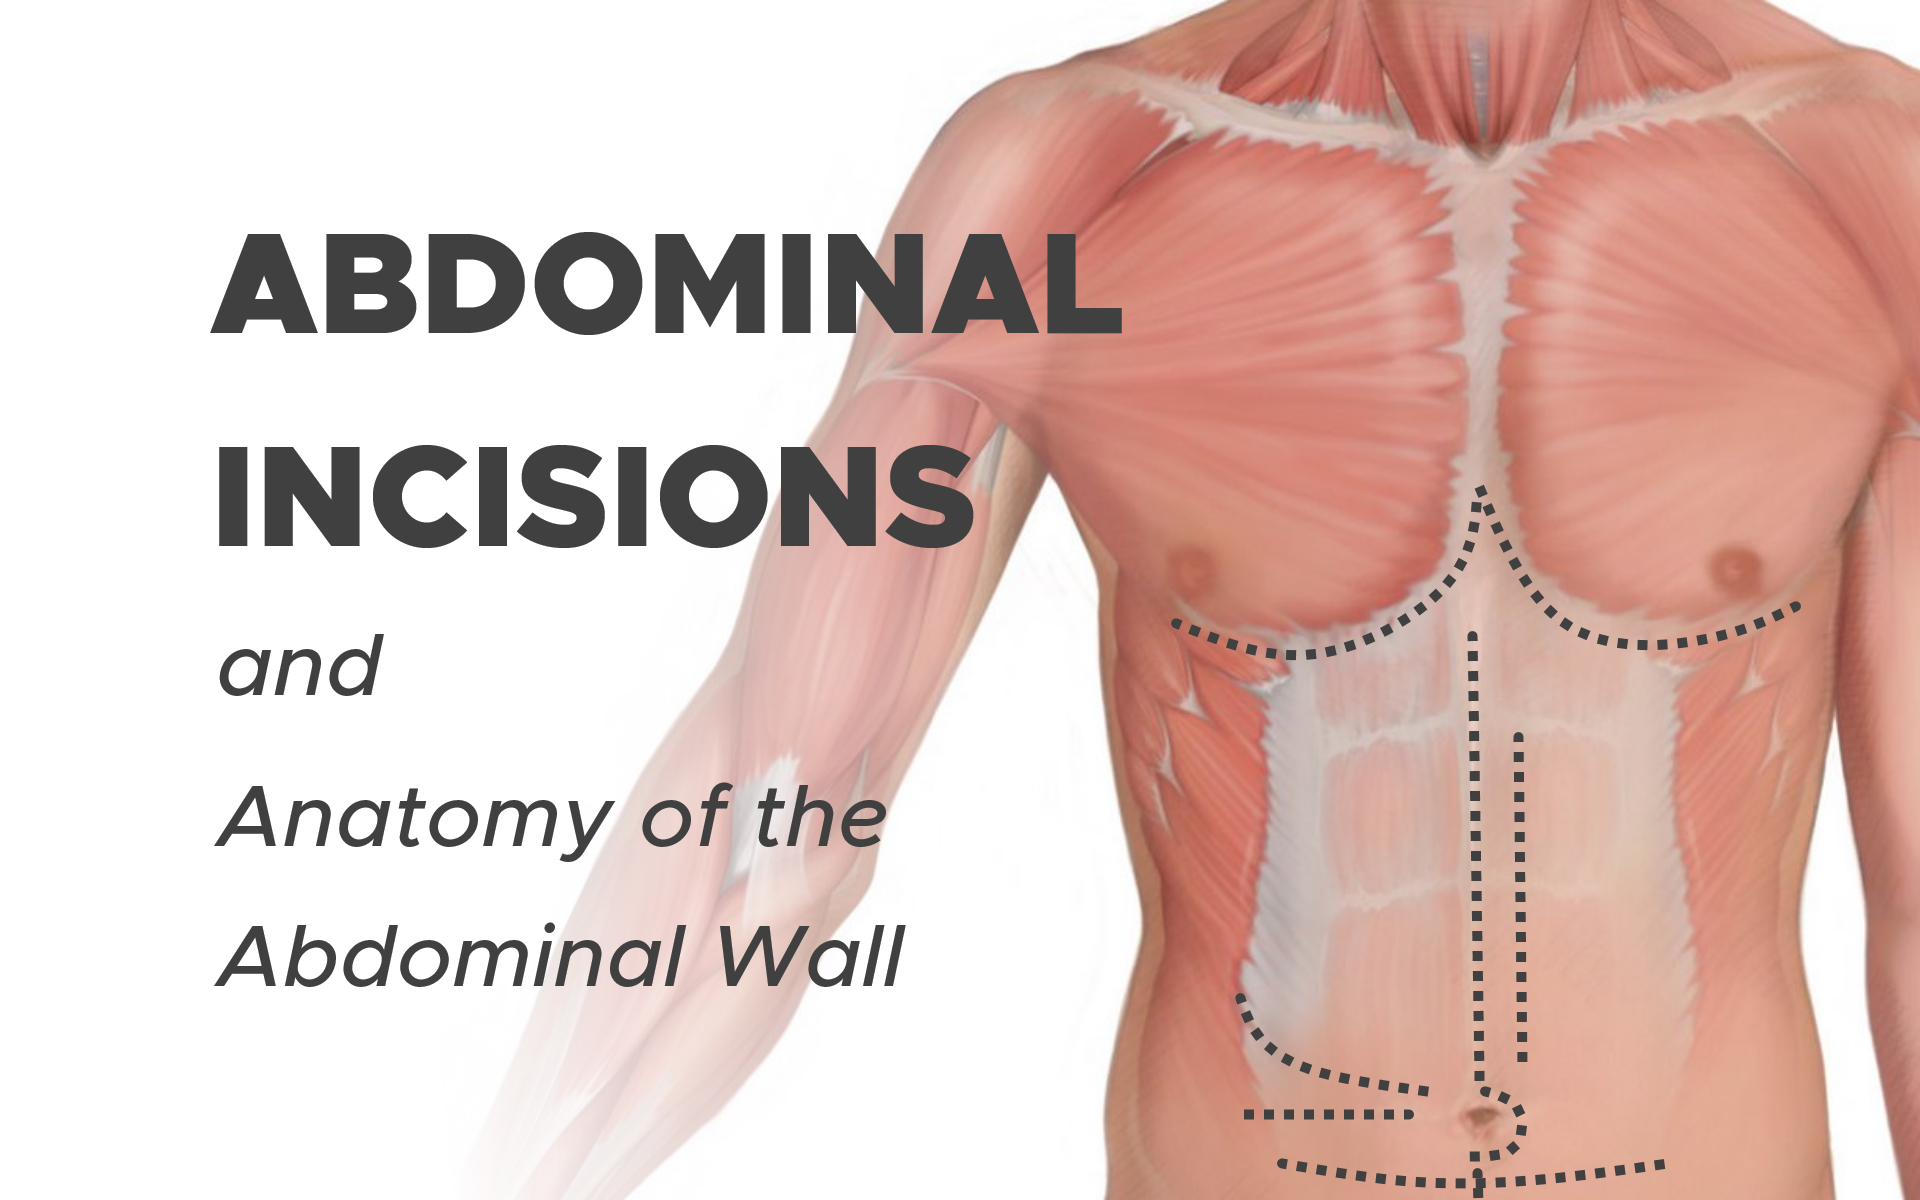 Types of Abdominal Incisions: Midline, Paramedian, Transverse and Oblique Incisions